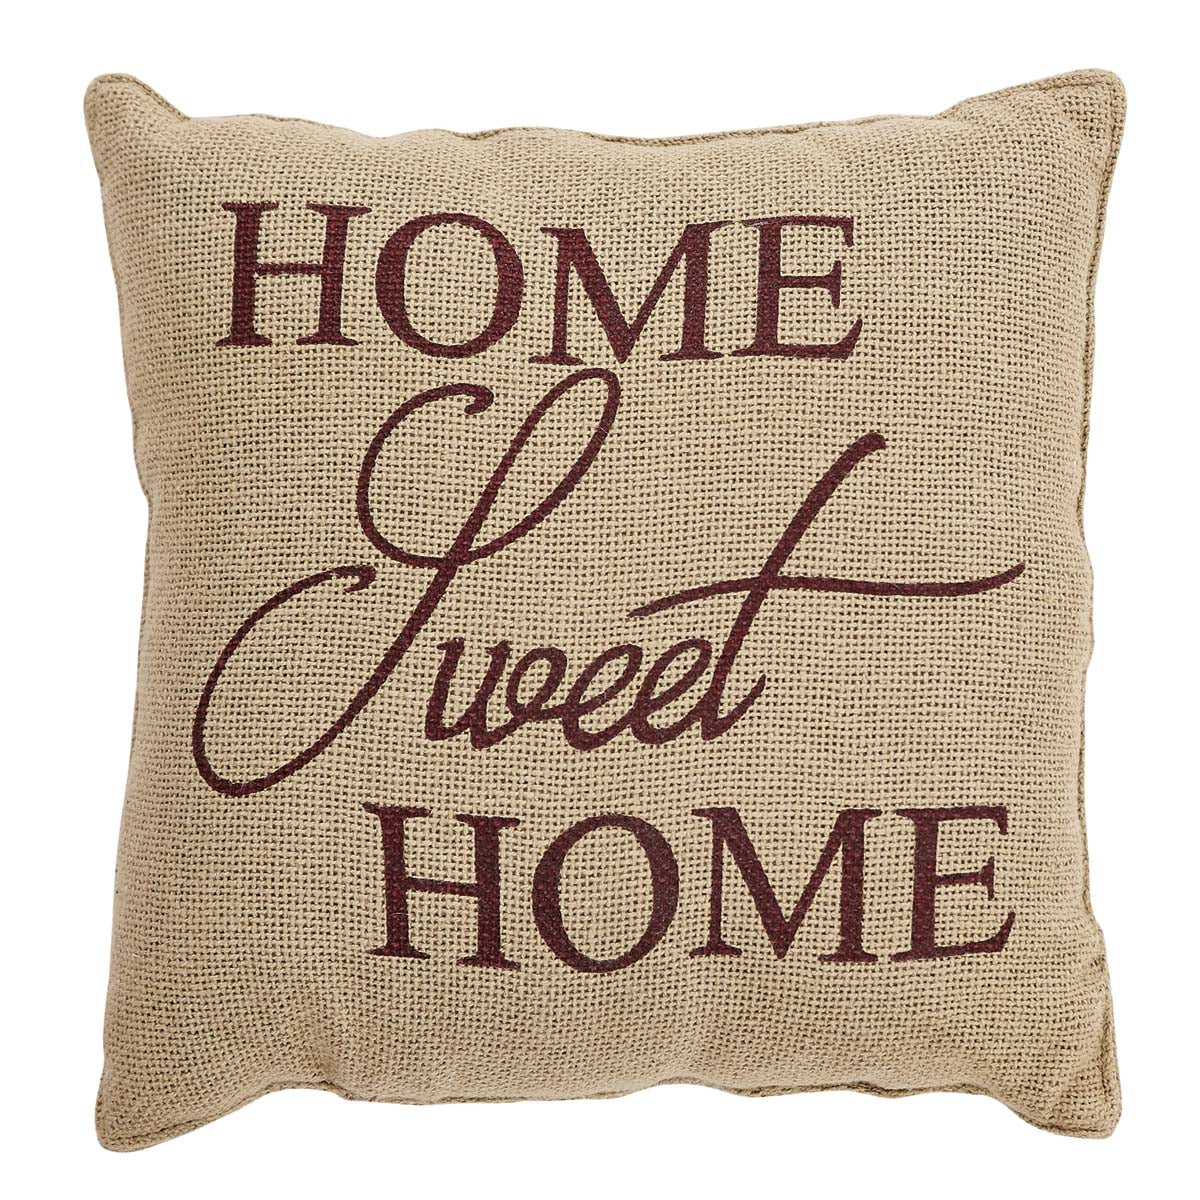 25874-Home-Sweet-Home-Pillow-12x12-image-2